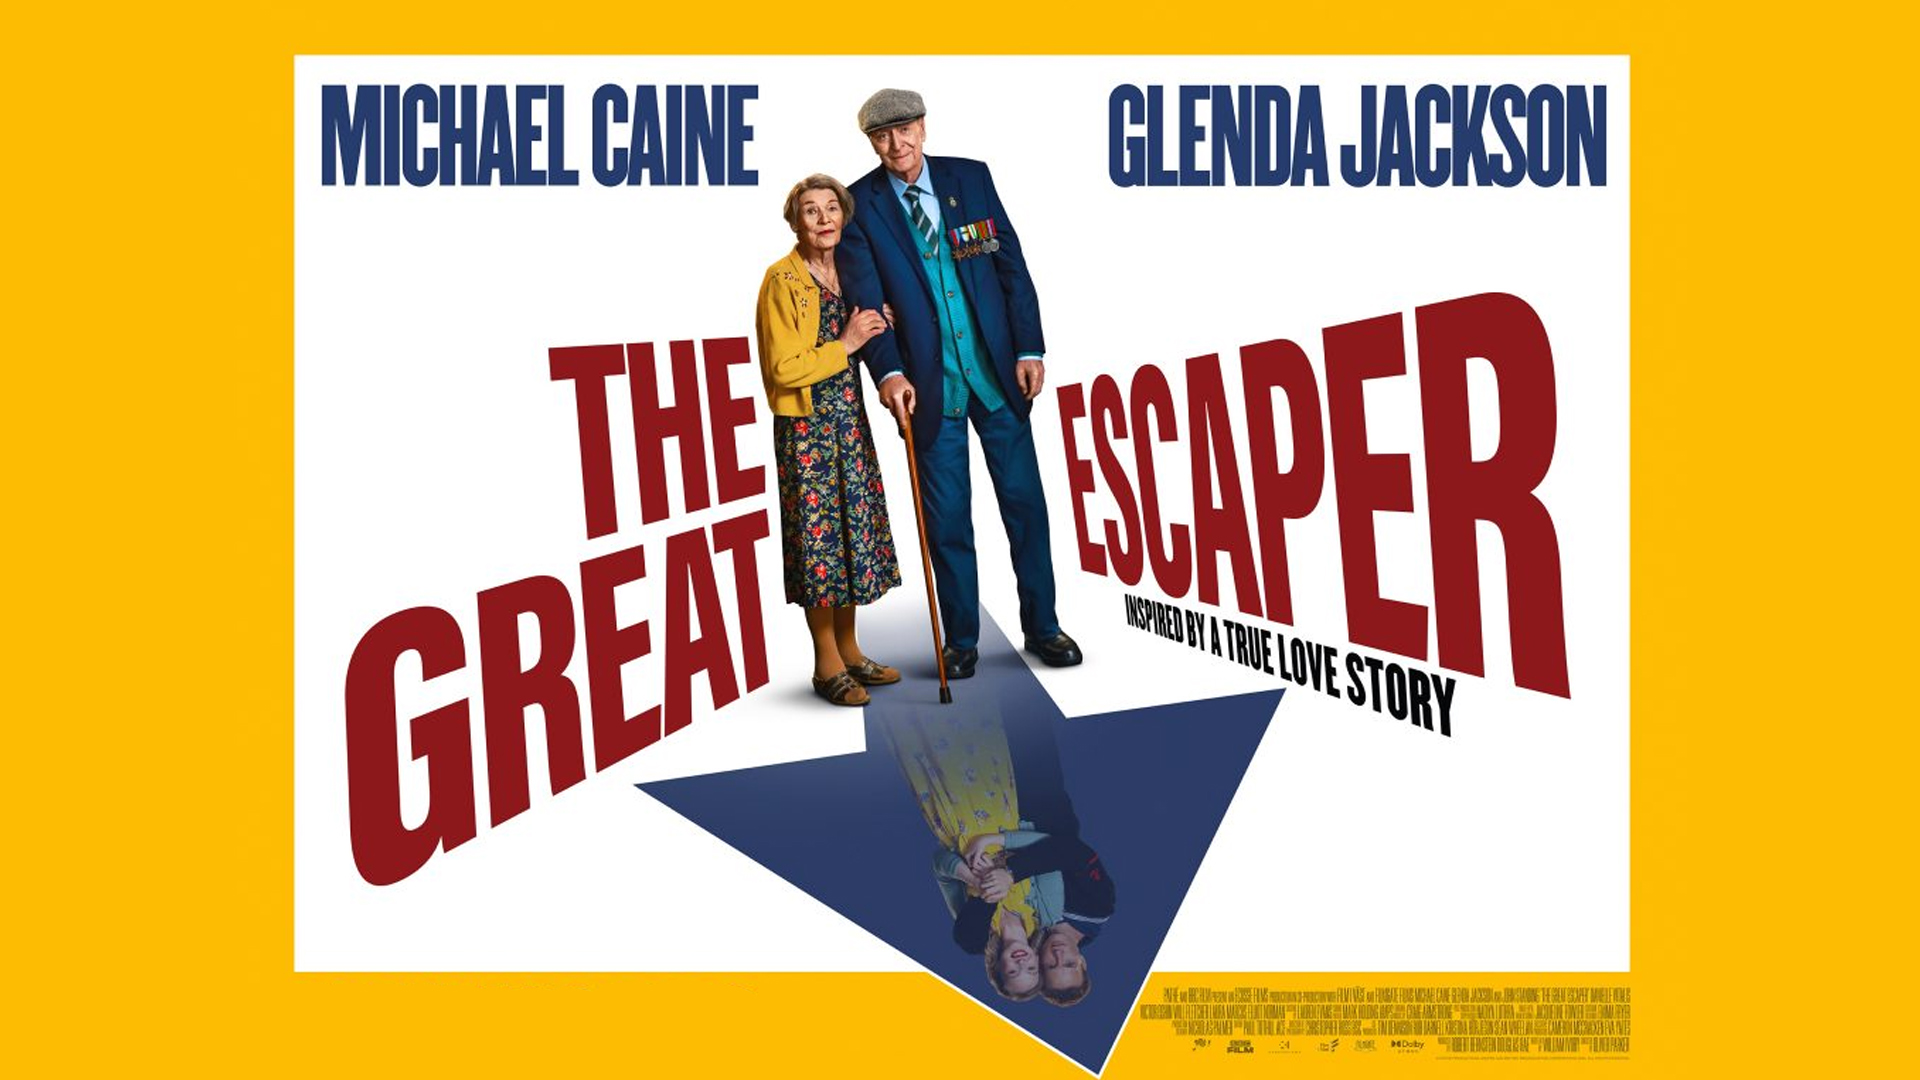 An image of the film the Great Escaper.